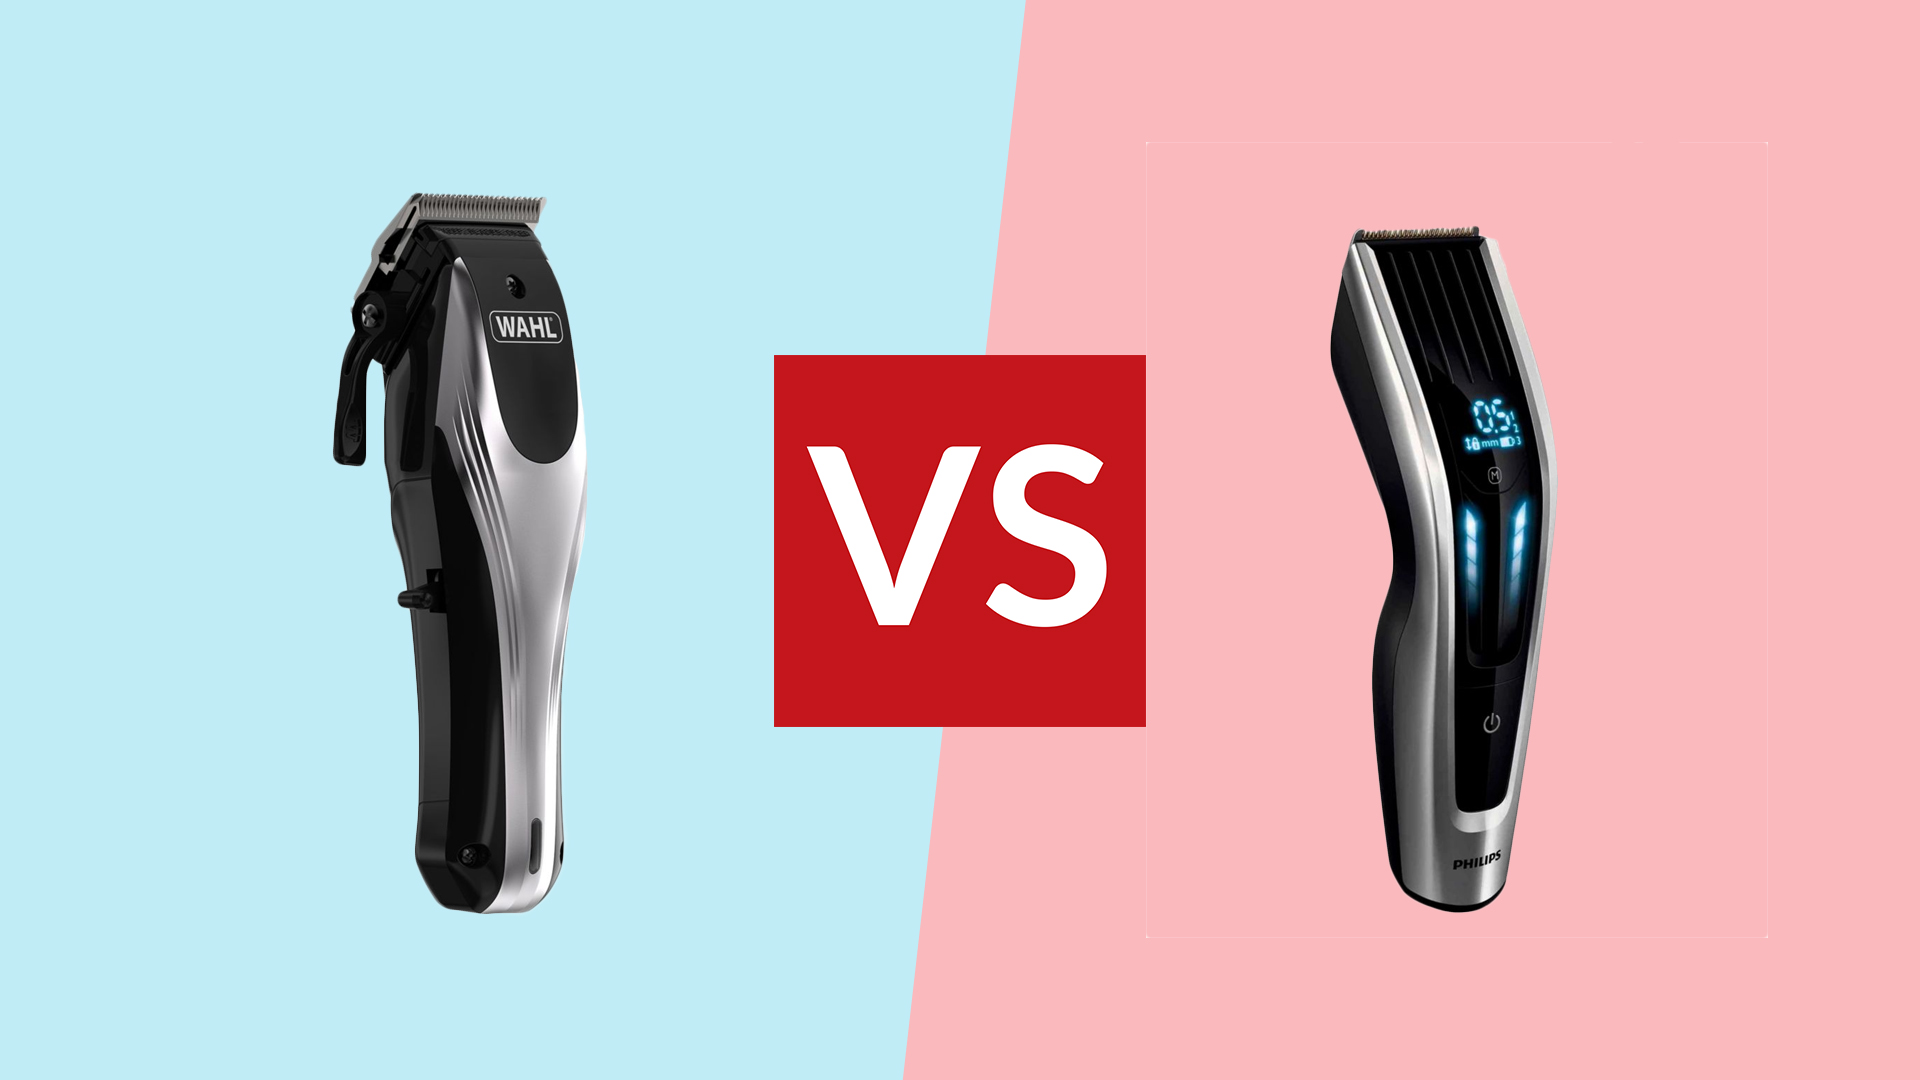 Wahl Rapid Clip vs Philips Series 9000: which is the best hair clipper? | T3